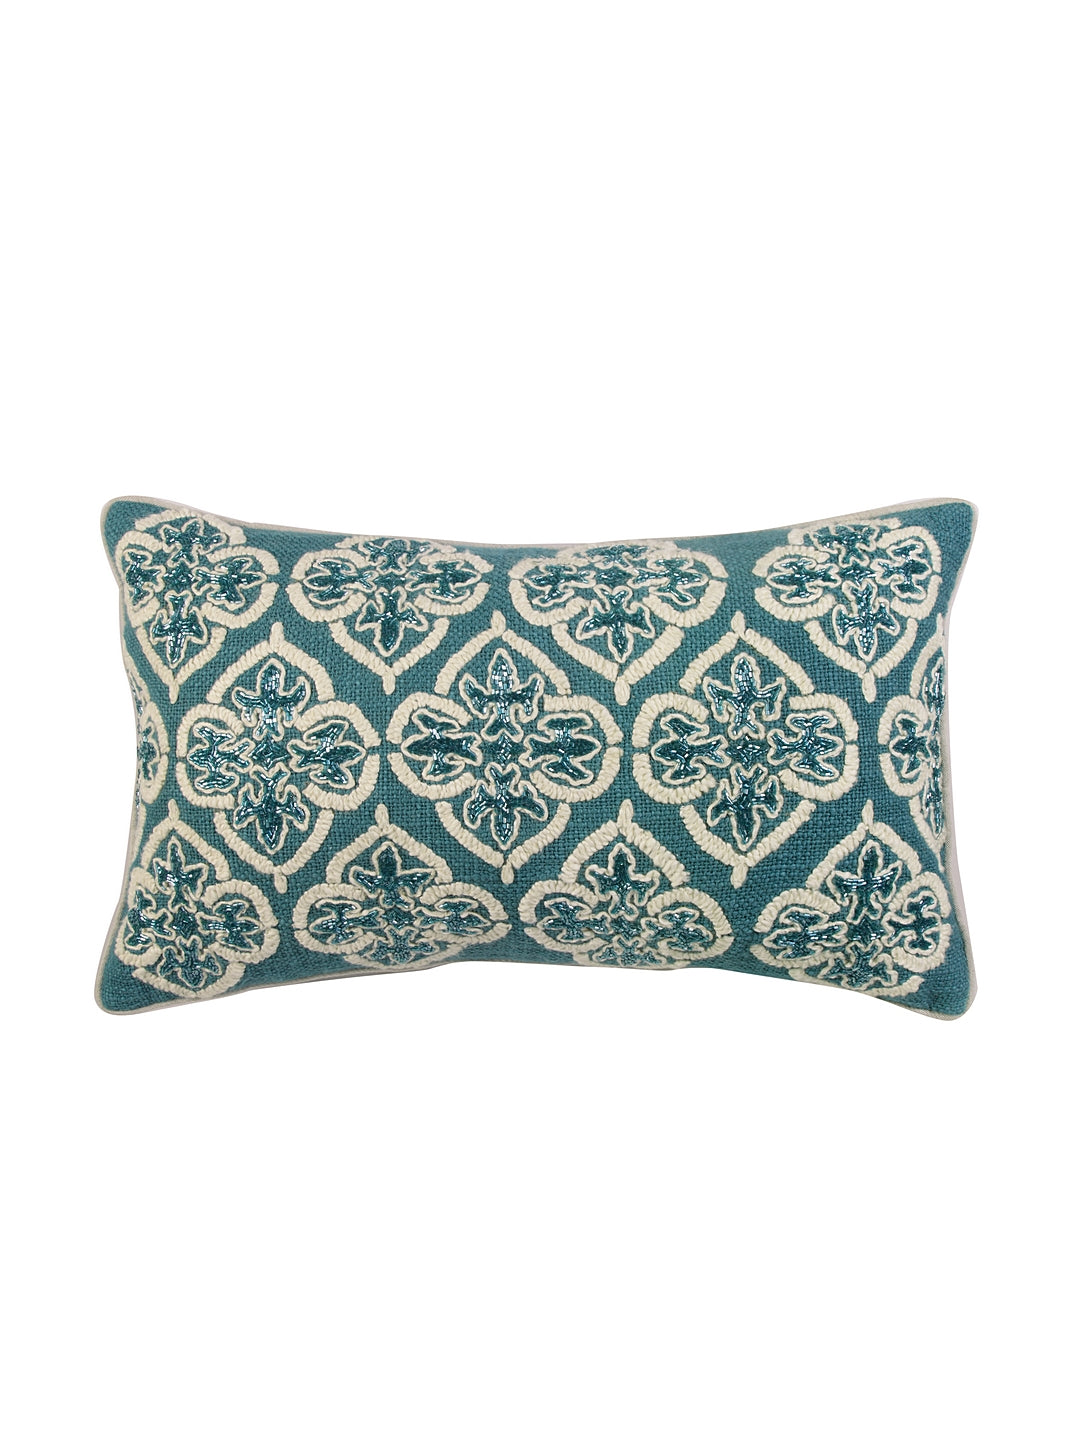 Blanc9 Ogee Embroidered Cushion Cover with Filler 30x50cm